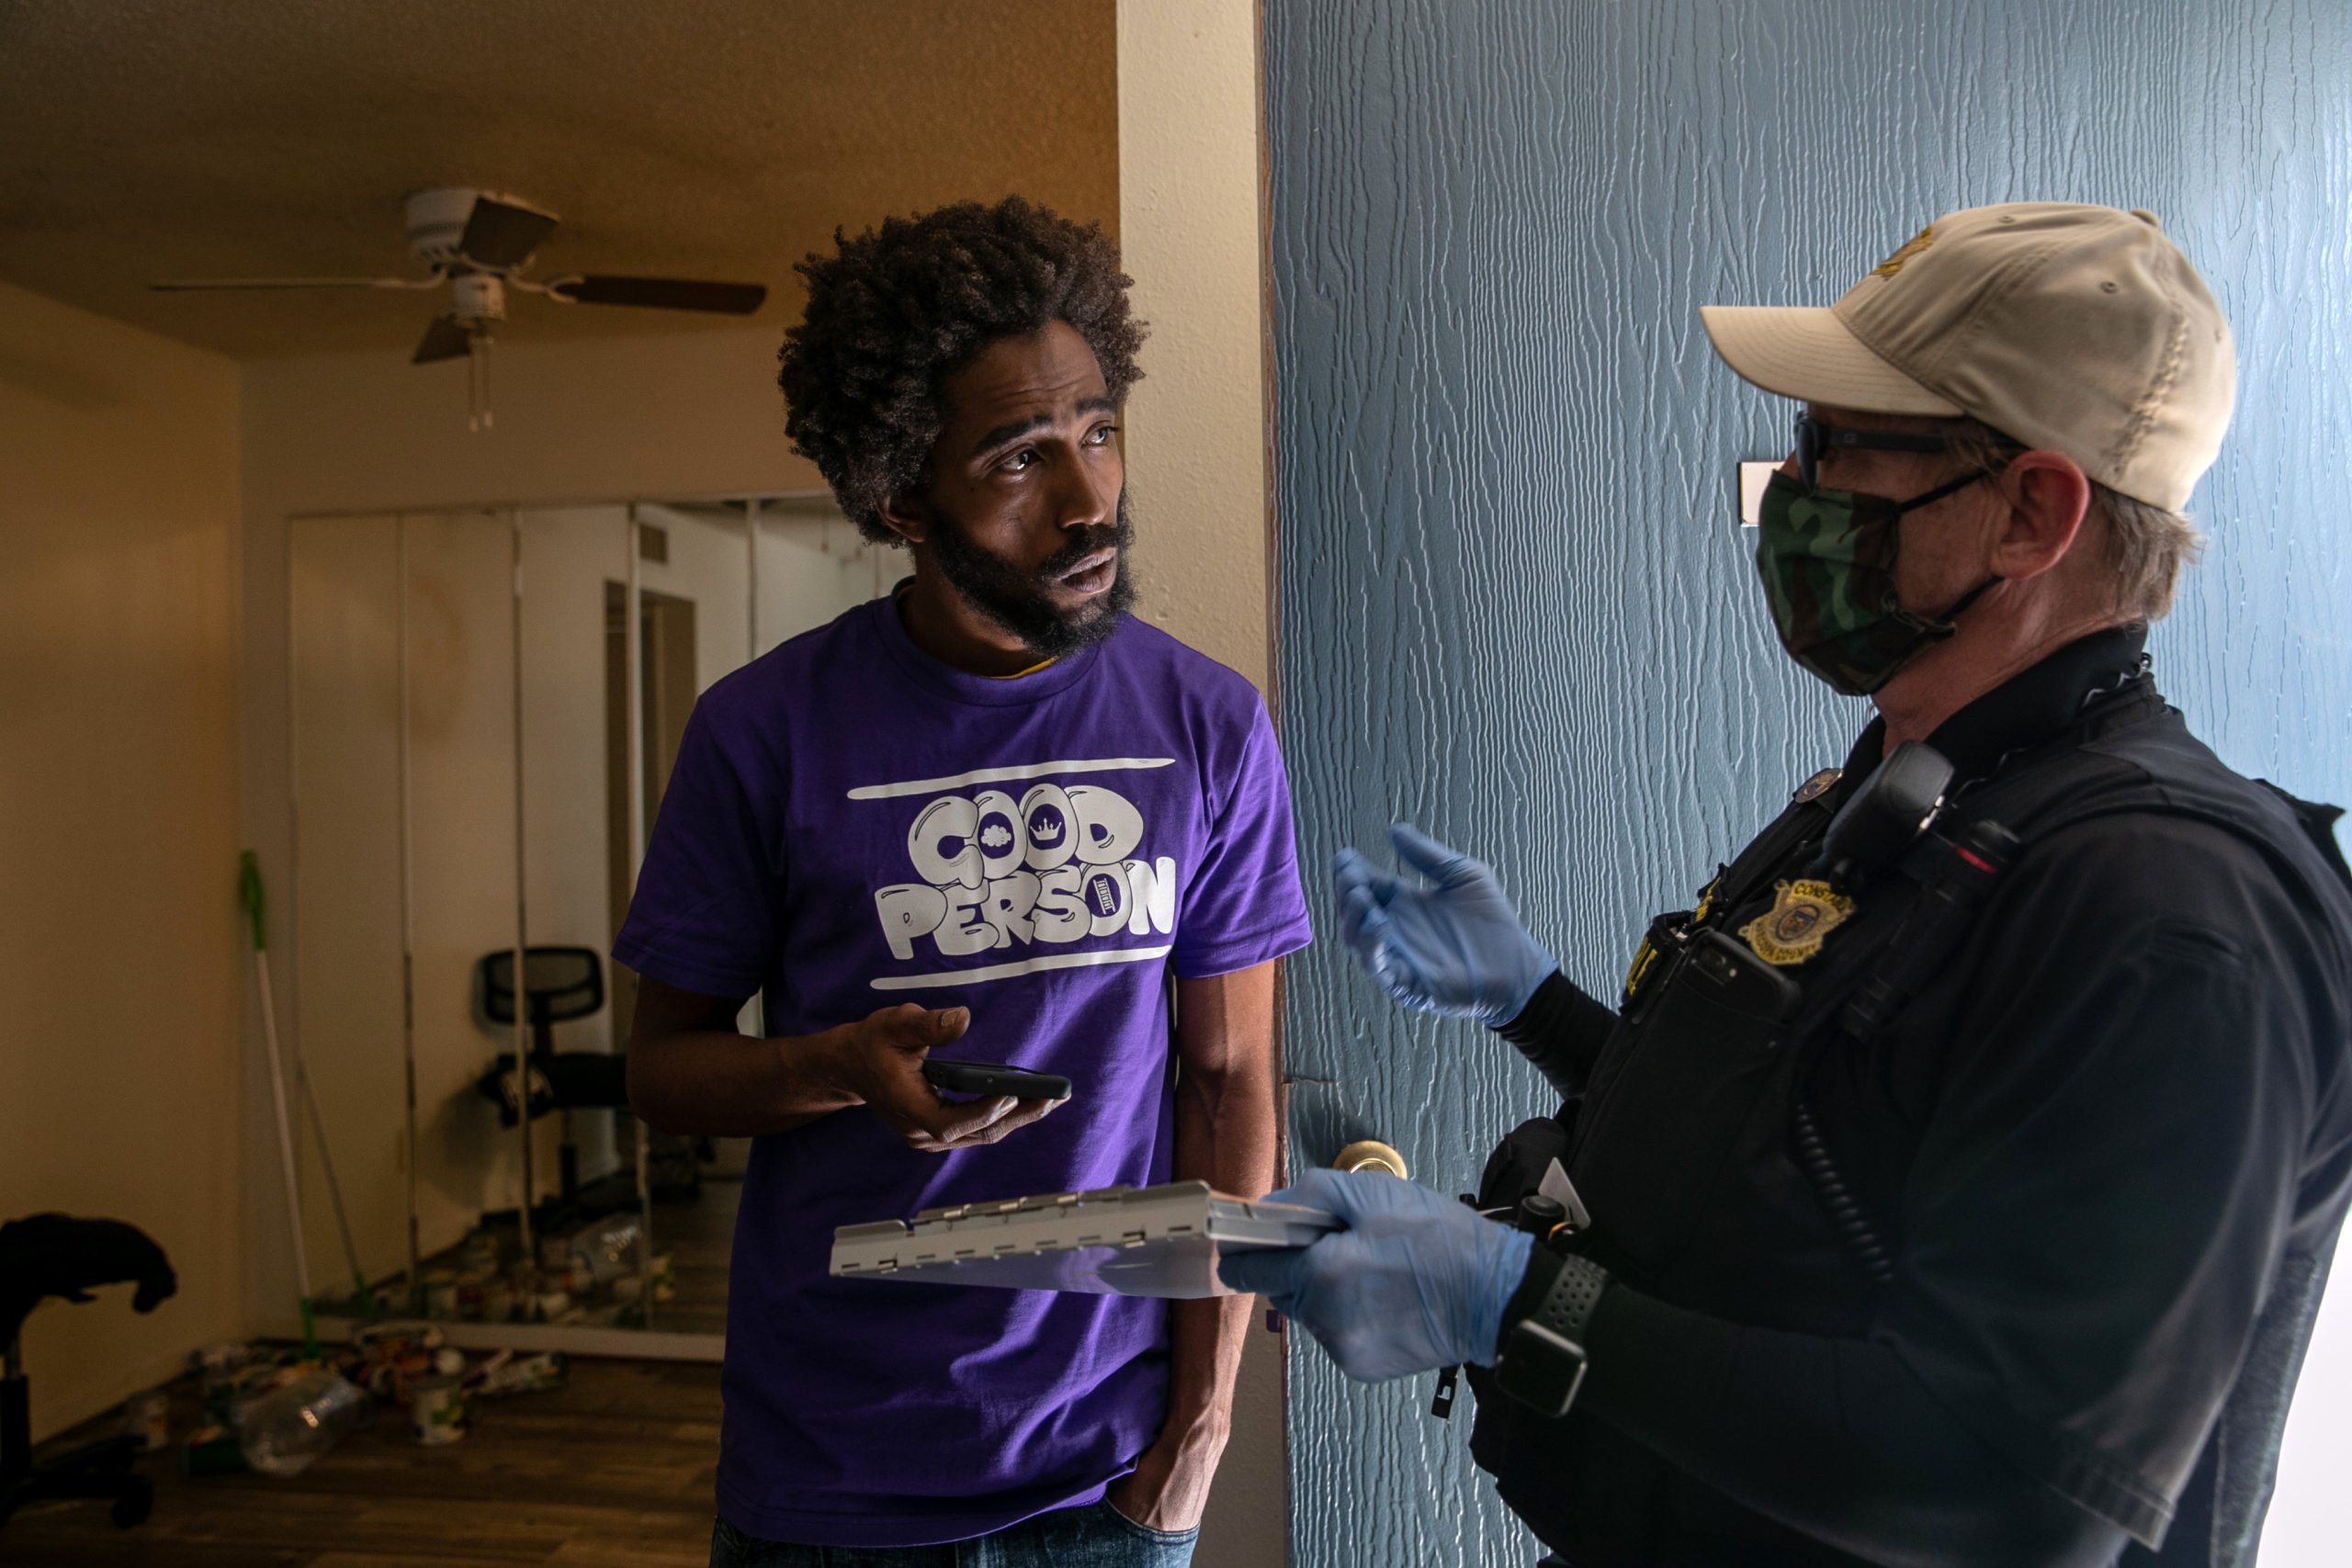 A police officer serves an eviction order to a delinquent tenant in October 2020 in Phoenix, Arizona. (John Moore/Getty Images)